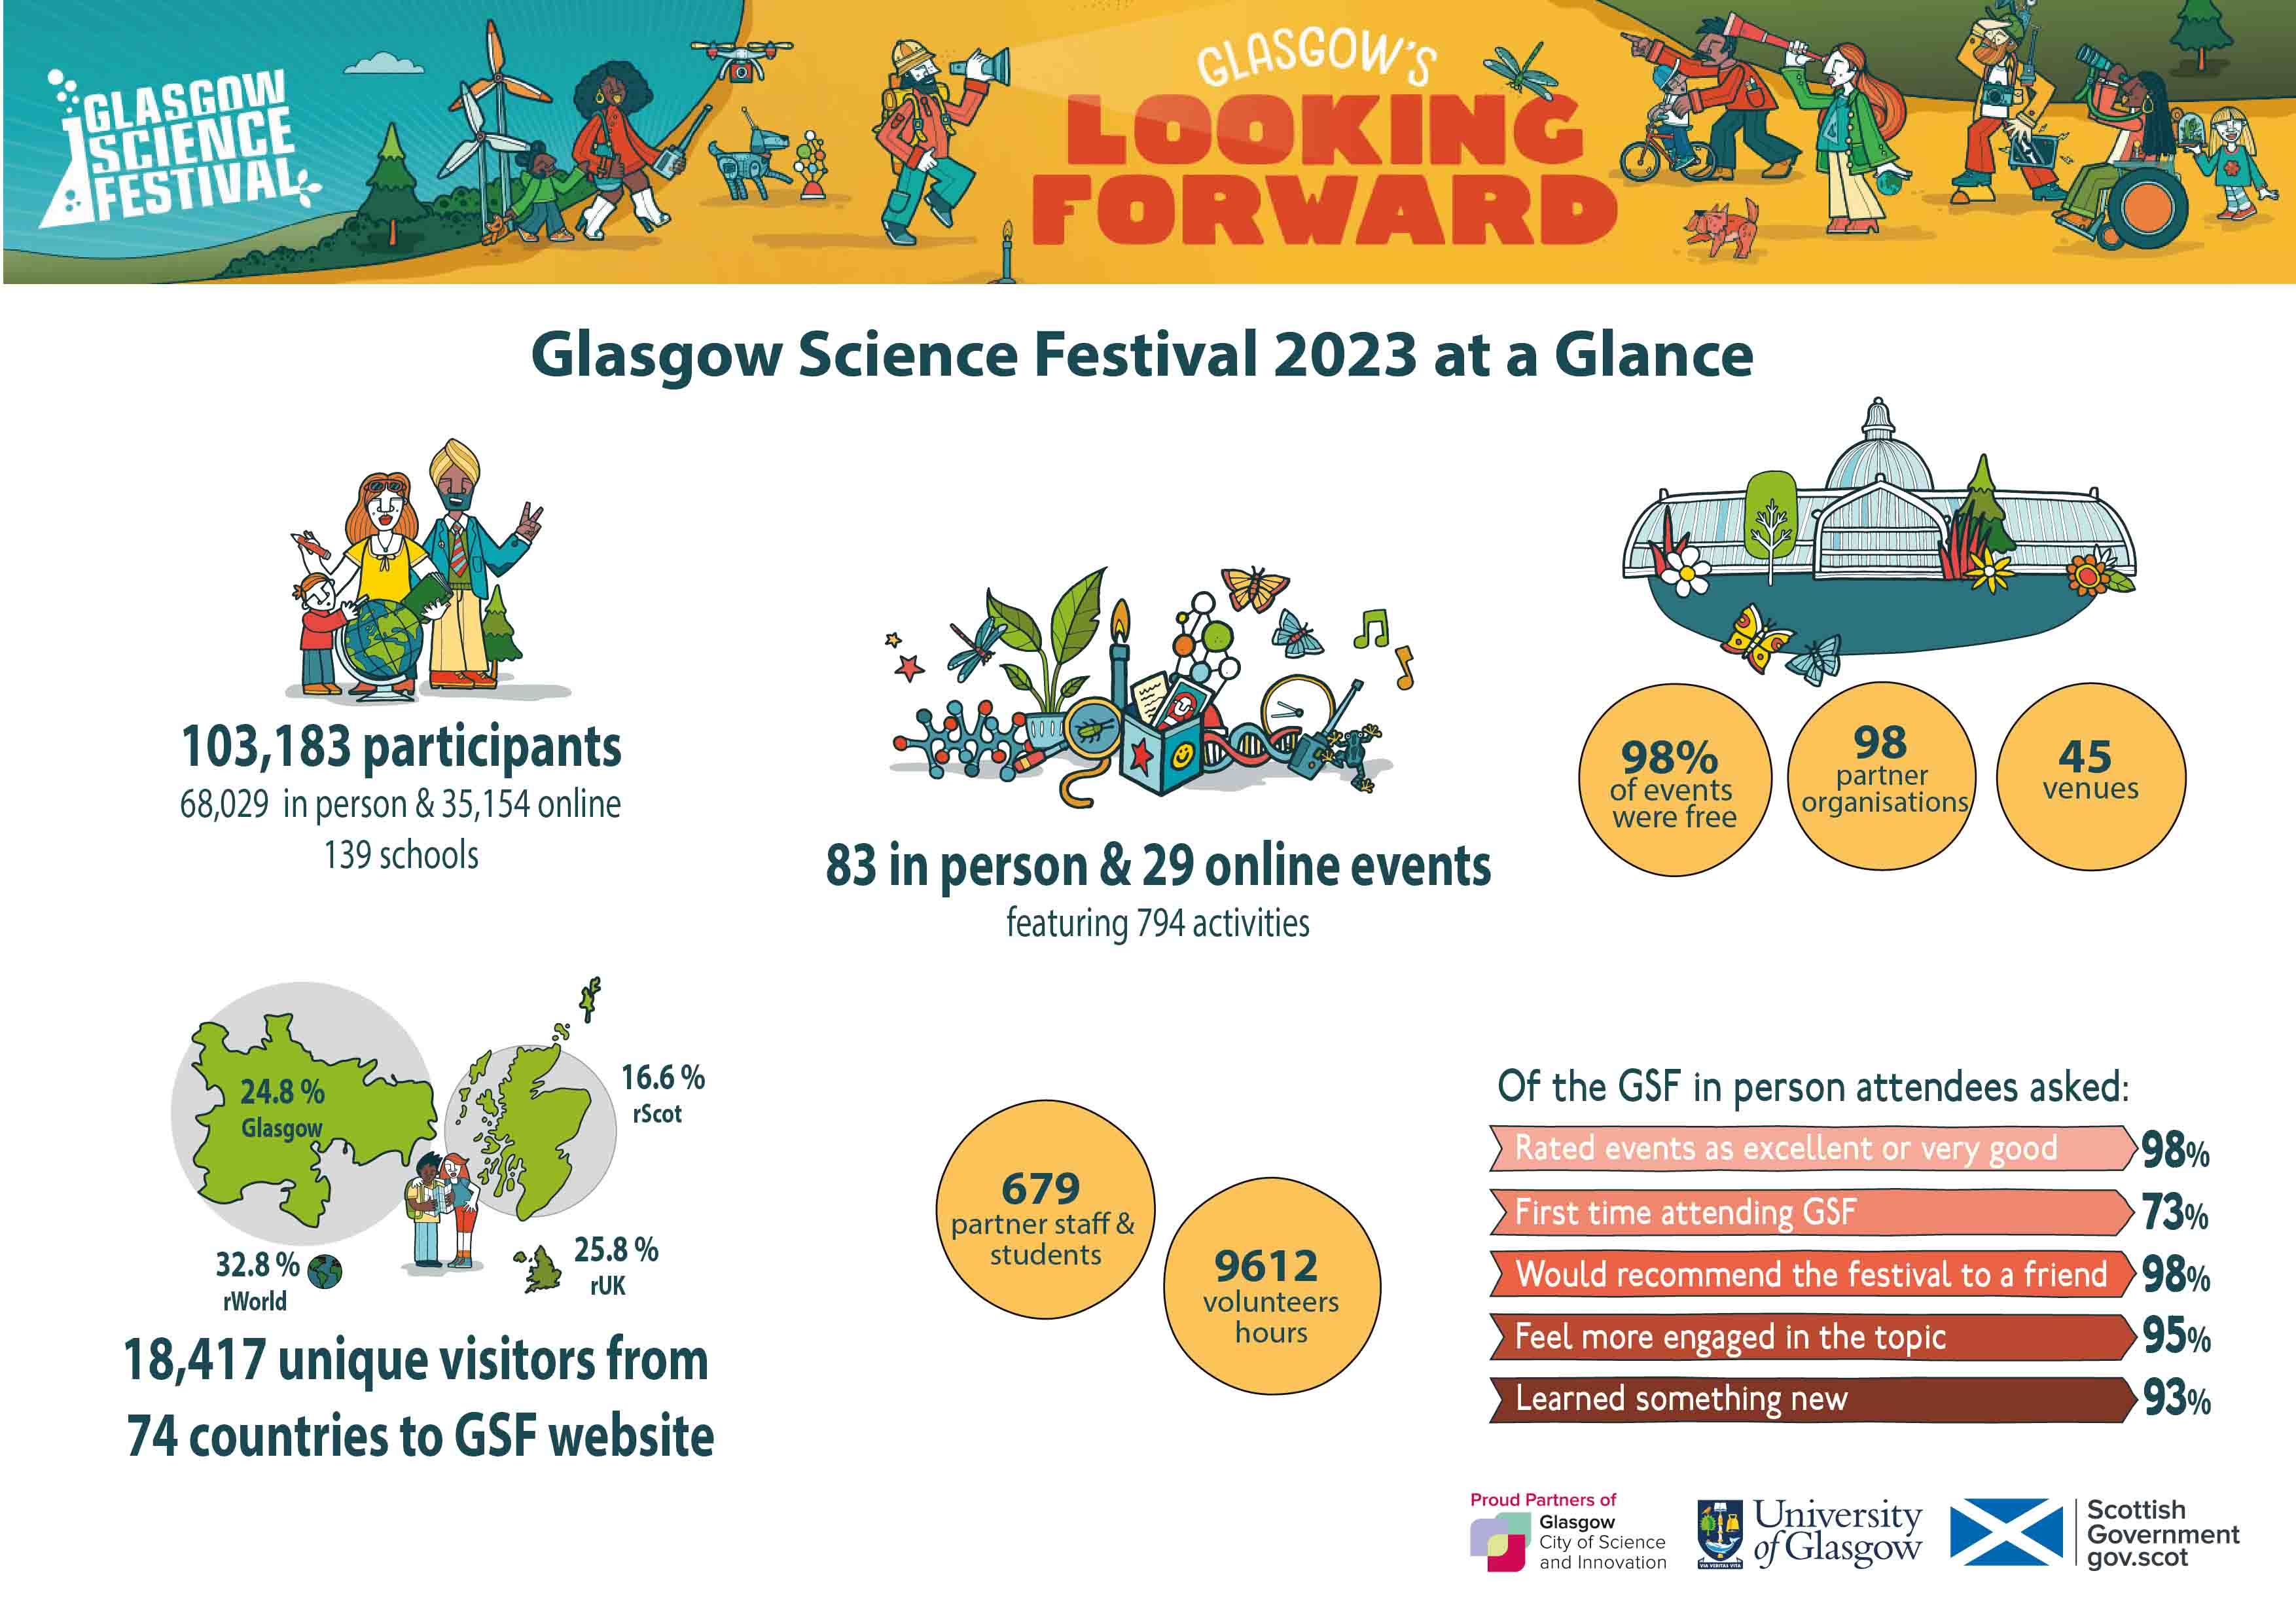 Summary image of the statistics from GSF23. 103,183 participants, 68029 in person & 35154 online, 139 schools. 83 in person & 29 online events featuring 794 activities. 98% of events were free, 98 partner organisations, 45 venues. 18417 unique visitors from 74 countries to GSF website, 28.4% glasgow, 16.6% rScot, 25.8% rUK, 32.8% rWorld. 679 partner staff & students, 9612 volunteer hours.